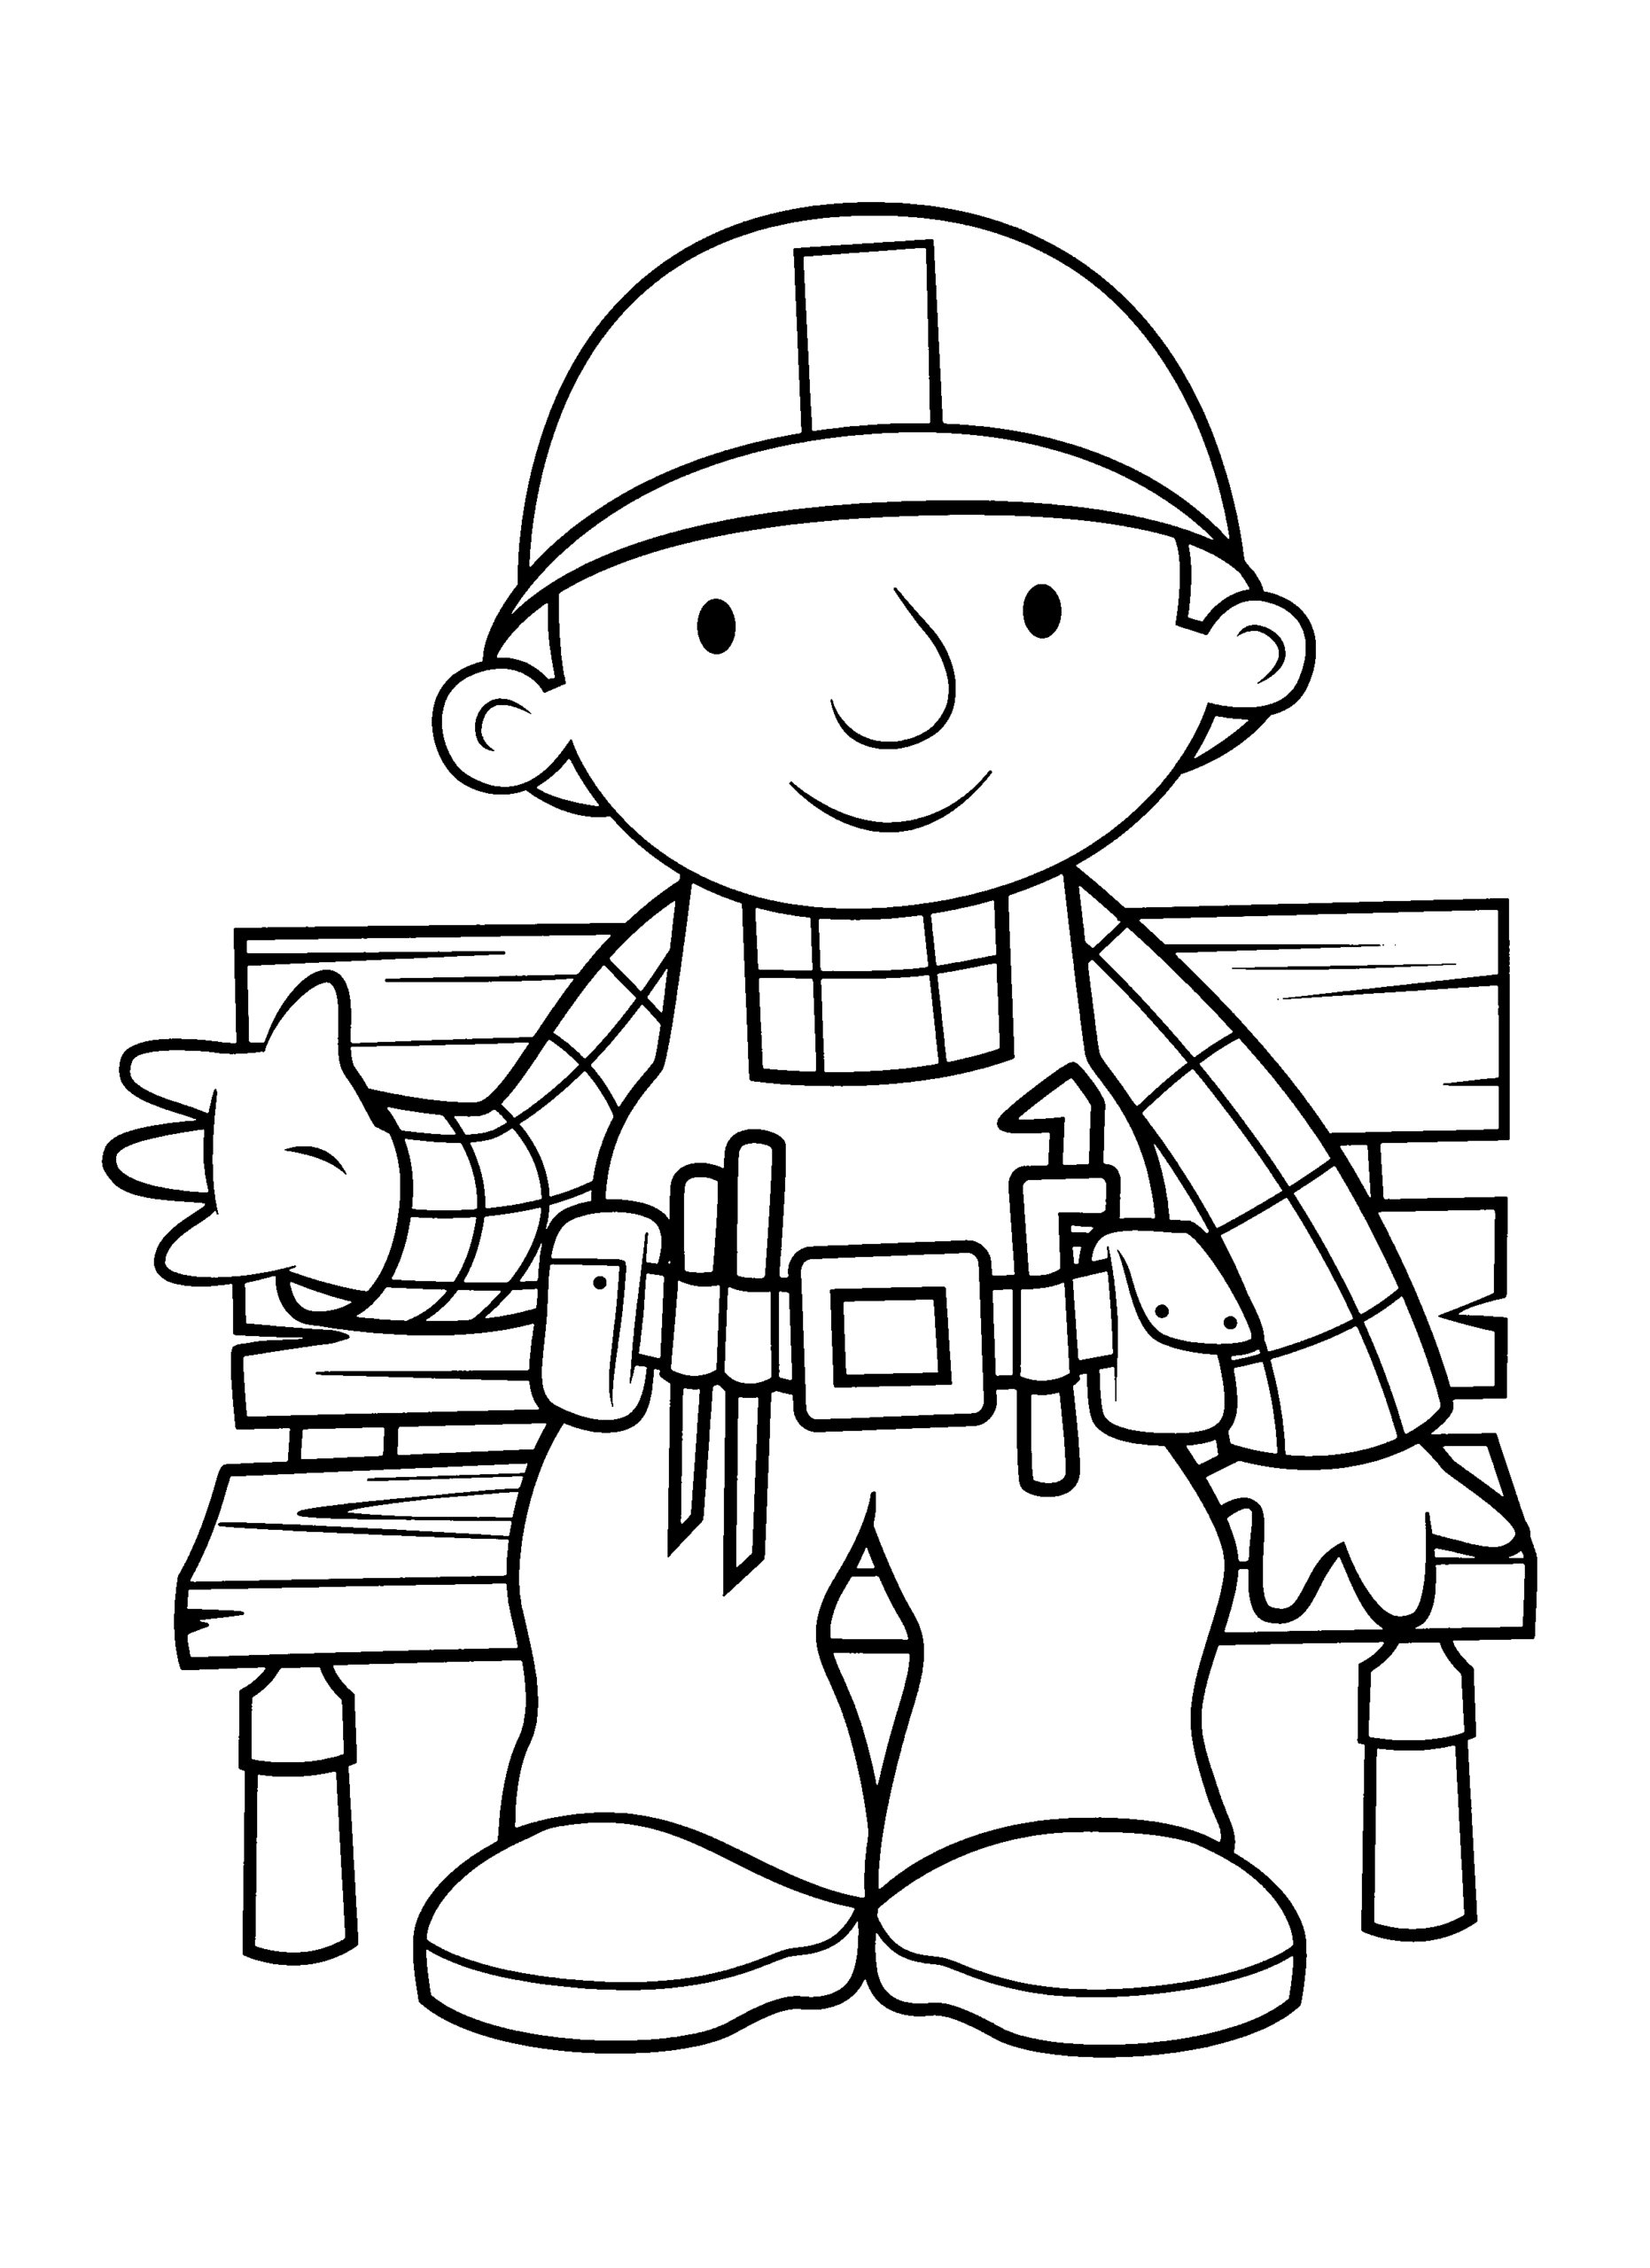 Bob the Builder Coloring Pages TV Film bob the builder 37 Printable 2020 01056 Coloring4free